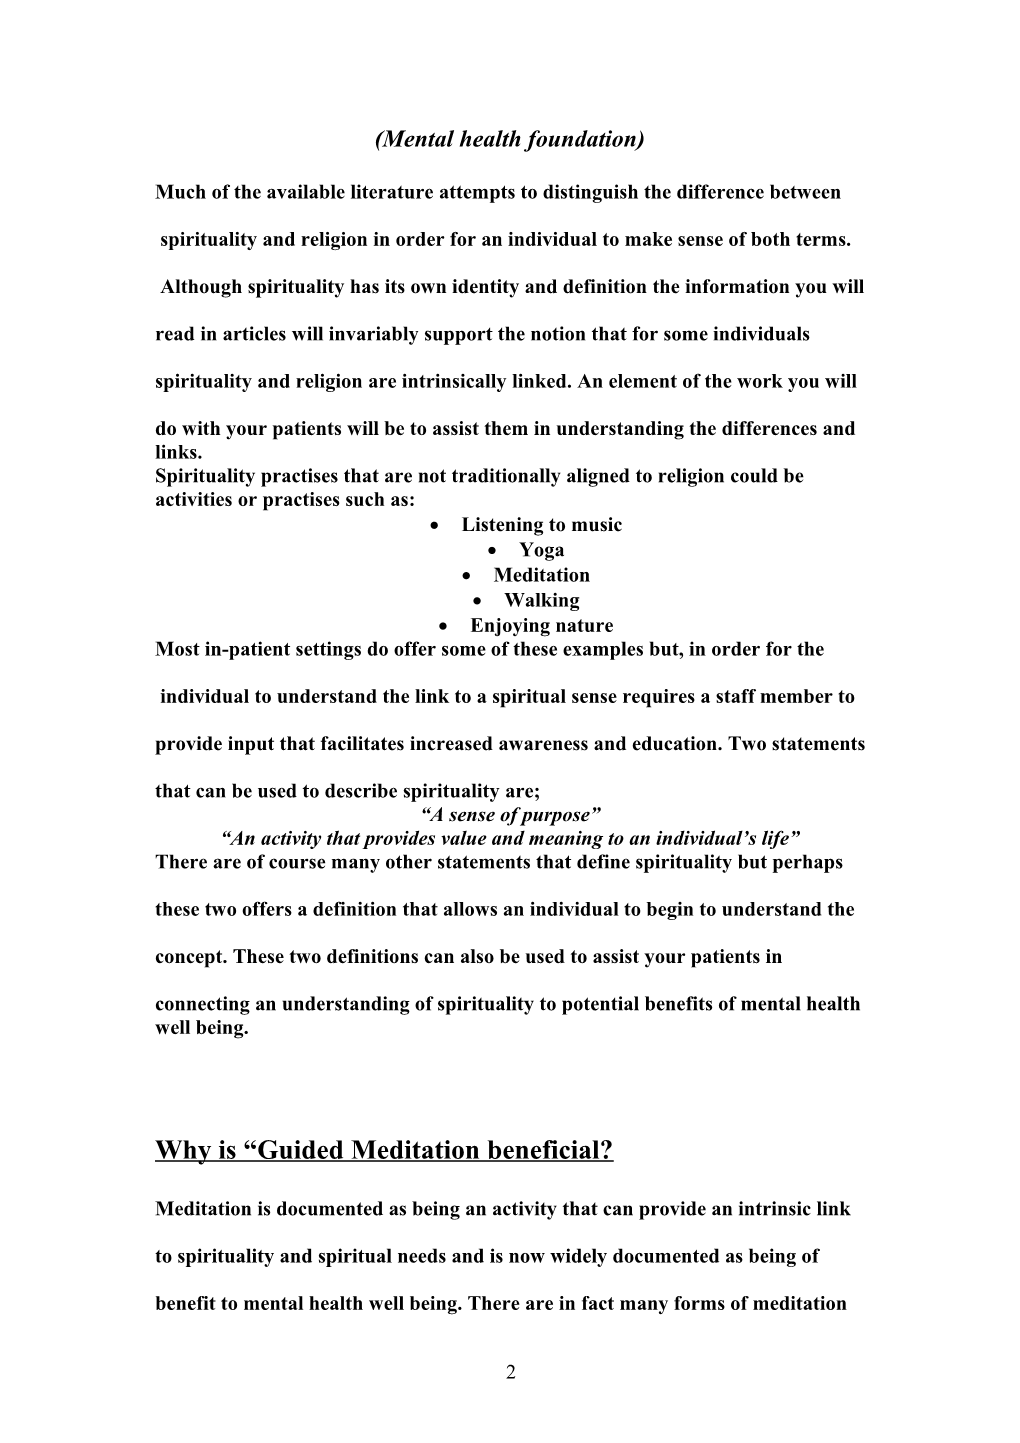 Toolkit for Introducing Guided Meditation Onto In-Pt Wards